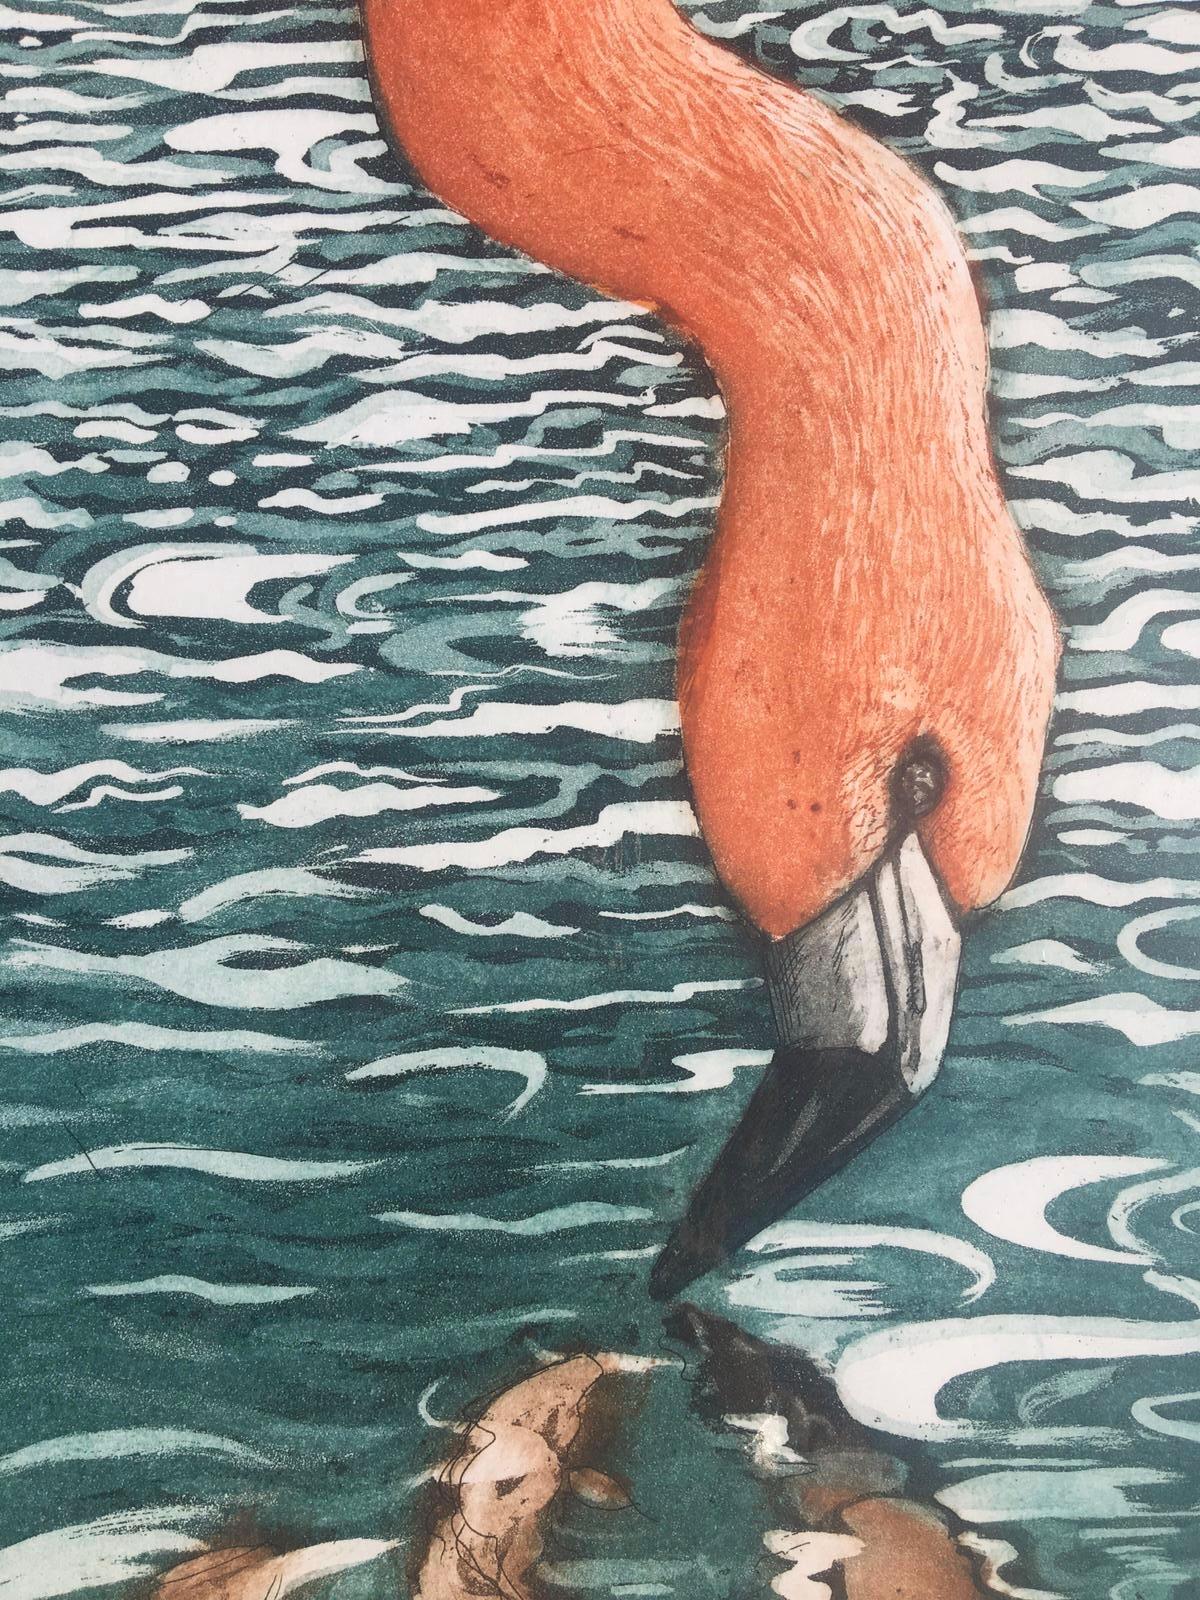 Flamenco Flamingo, Jane Peart, Limited edition print, Animals and wildlife art - Contemporary Print by Jane Peart 